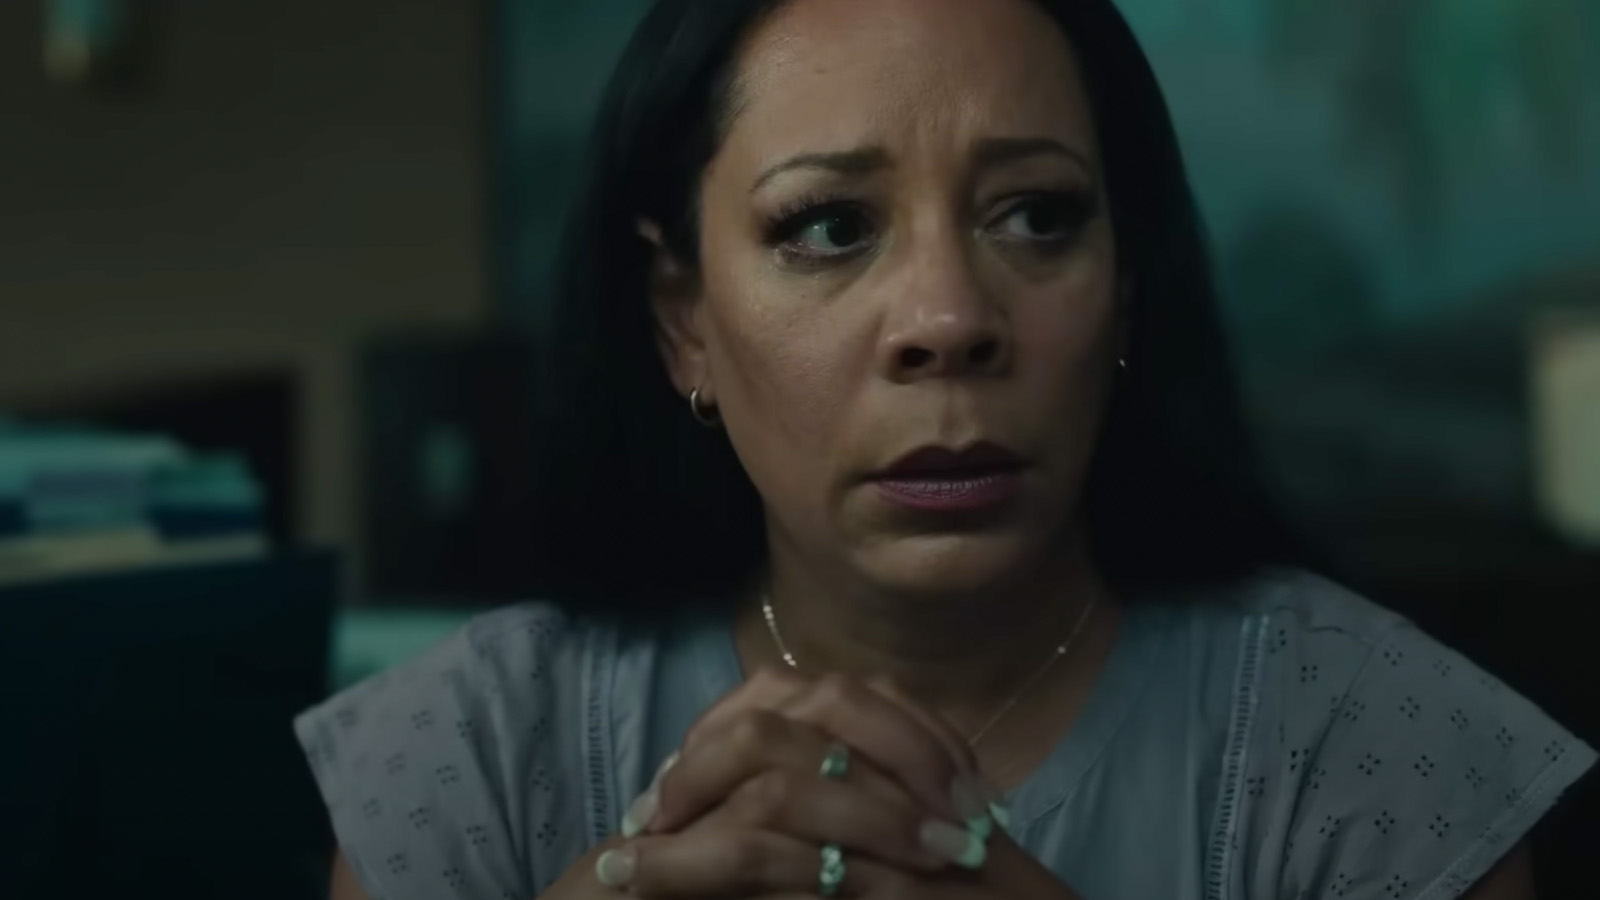 Selenis Leyva plays Rosa Diaz, the bank teller confronted with an immediate threat.